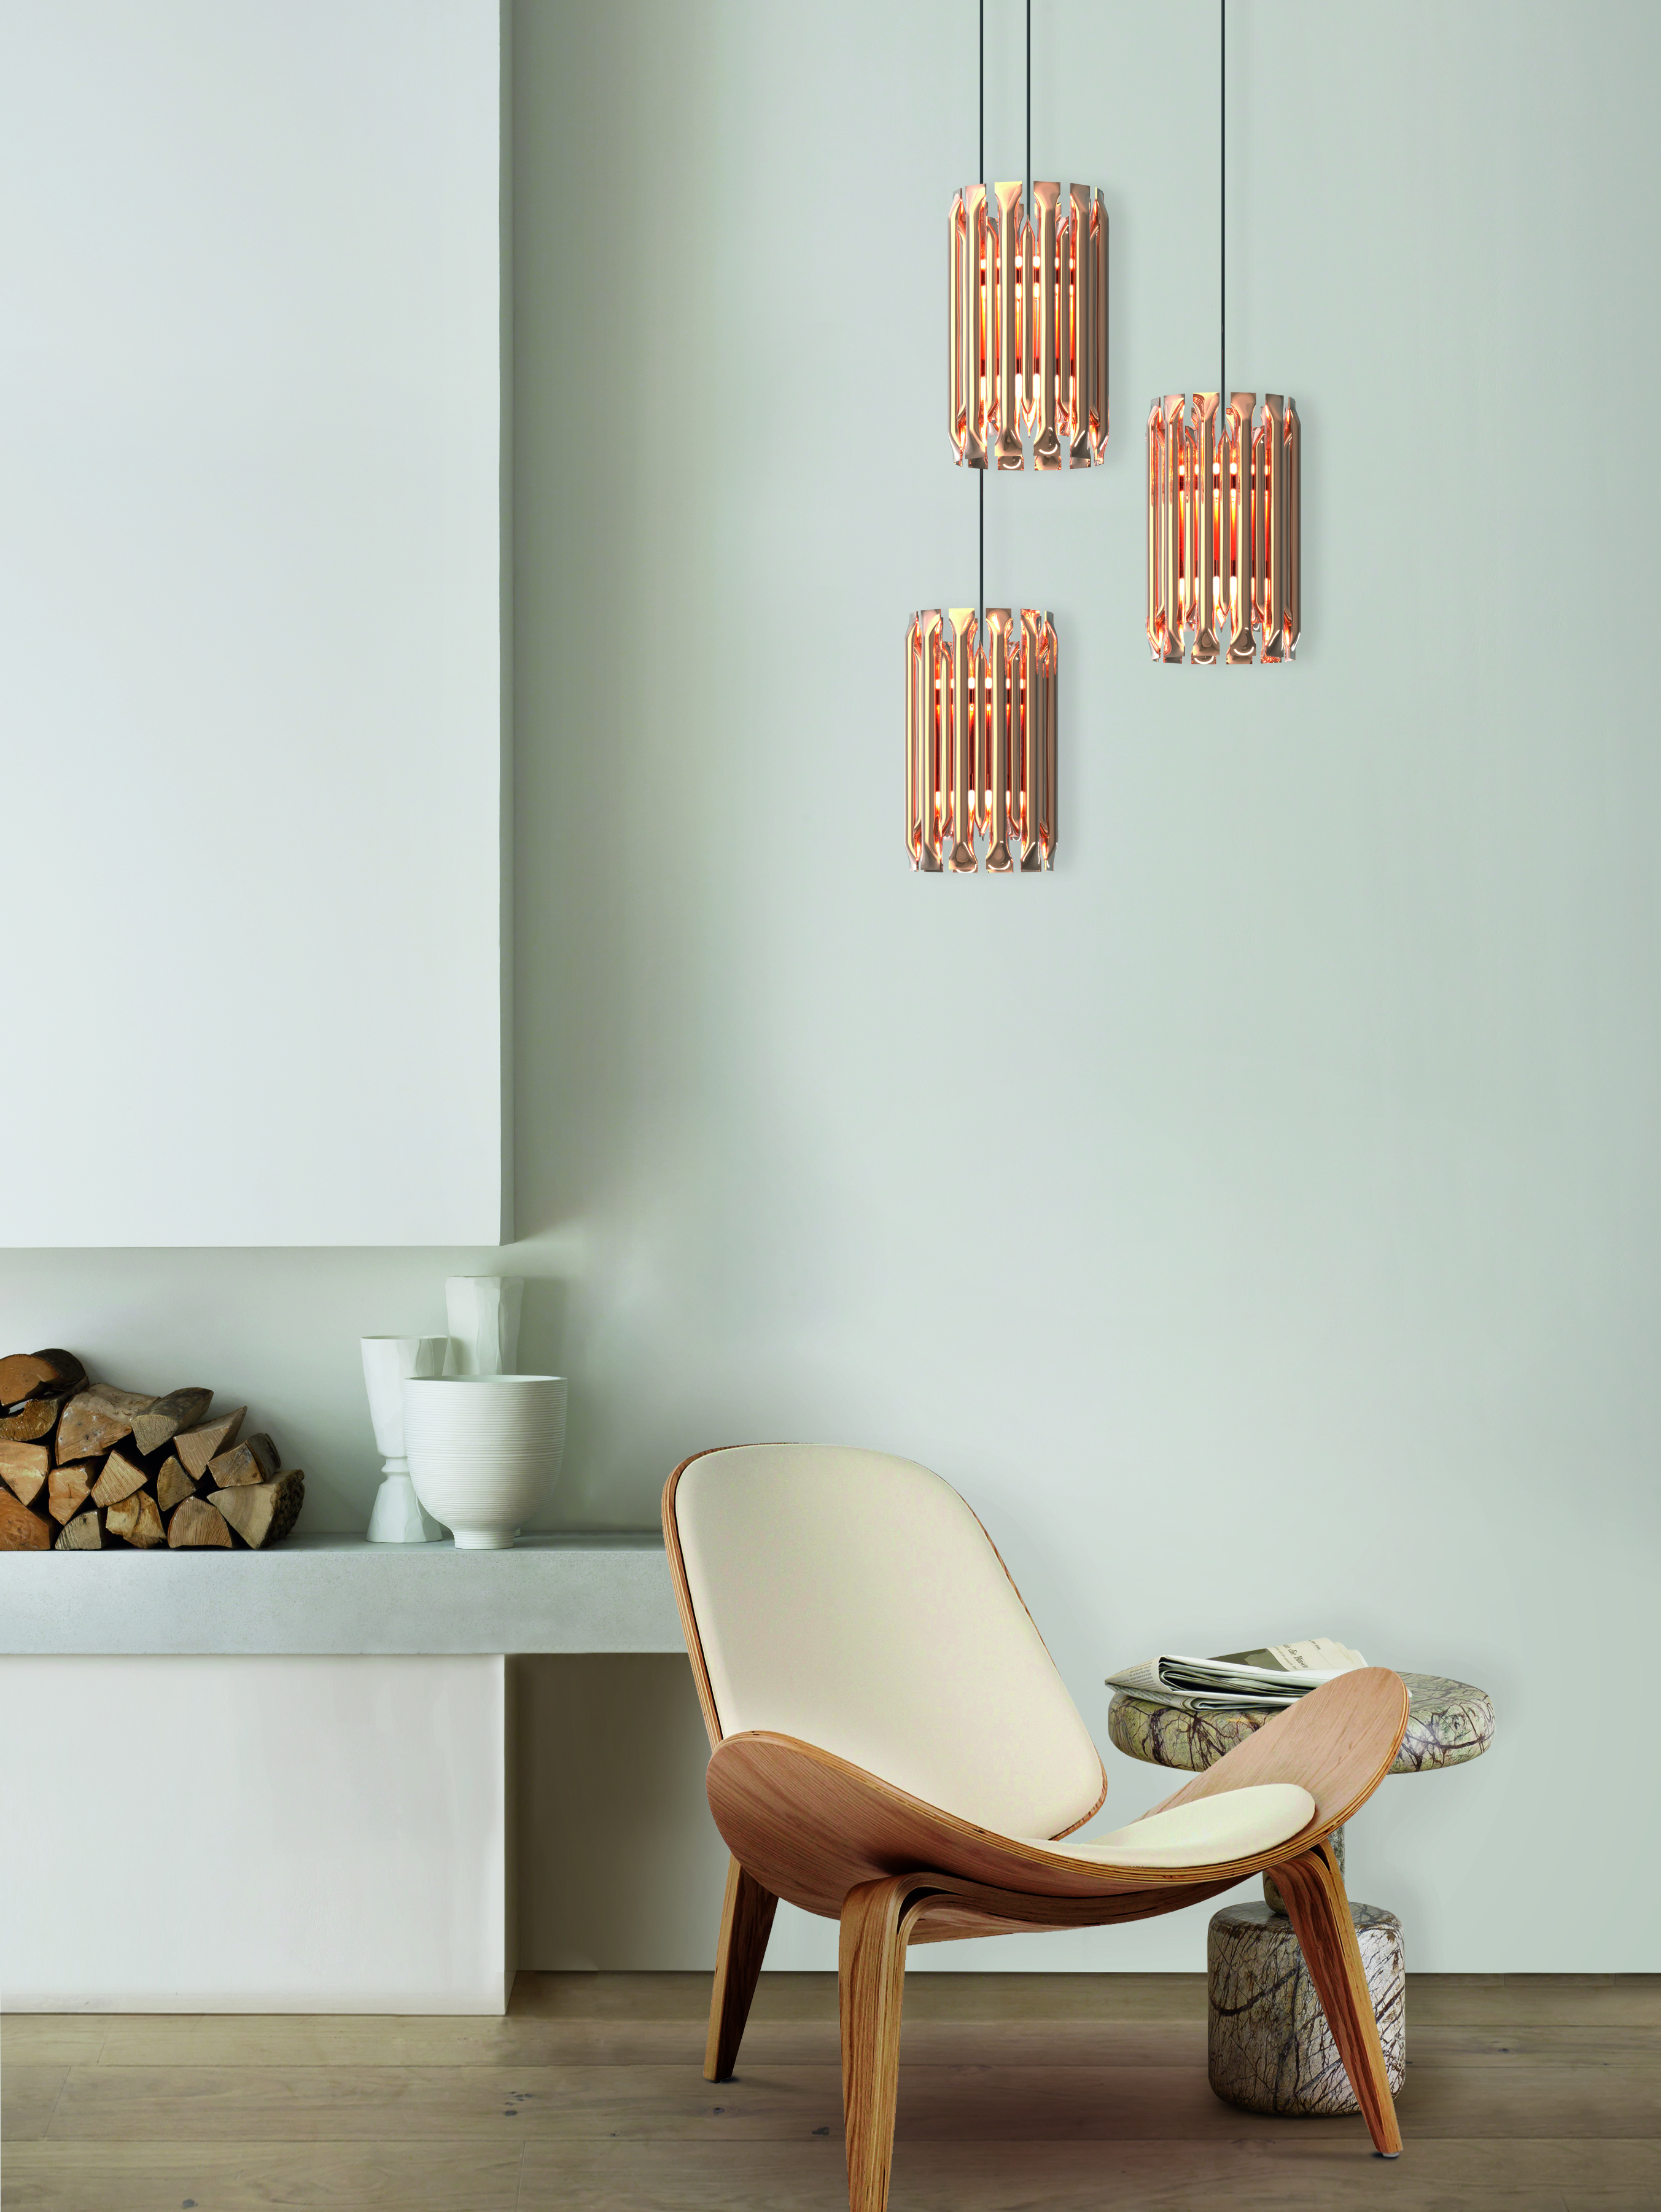 Bright Ideas Light Fixtures for Your Home Decor